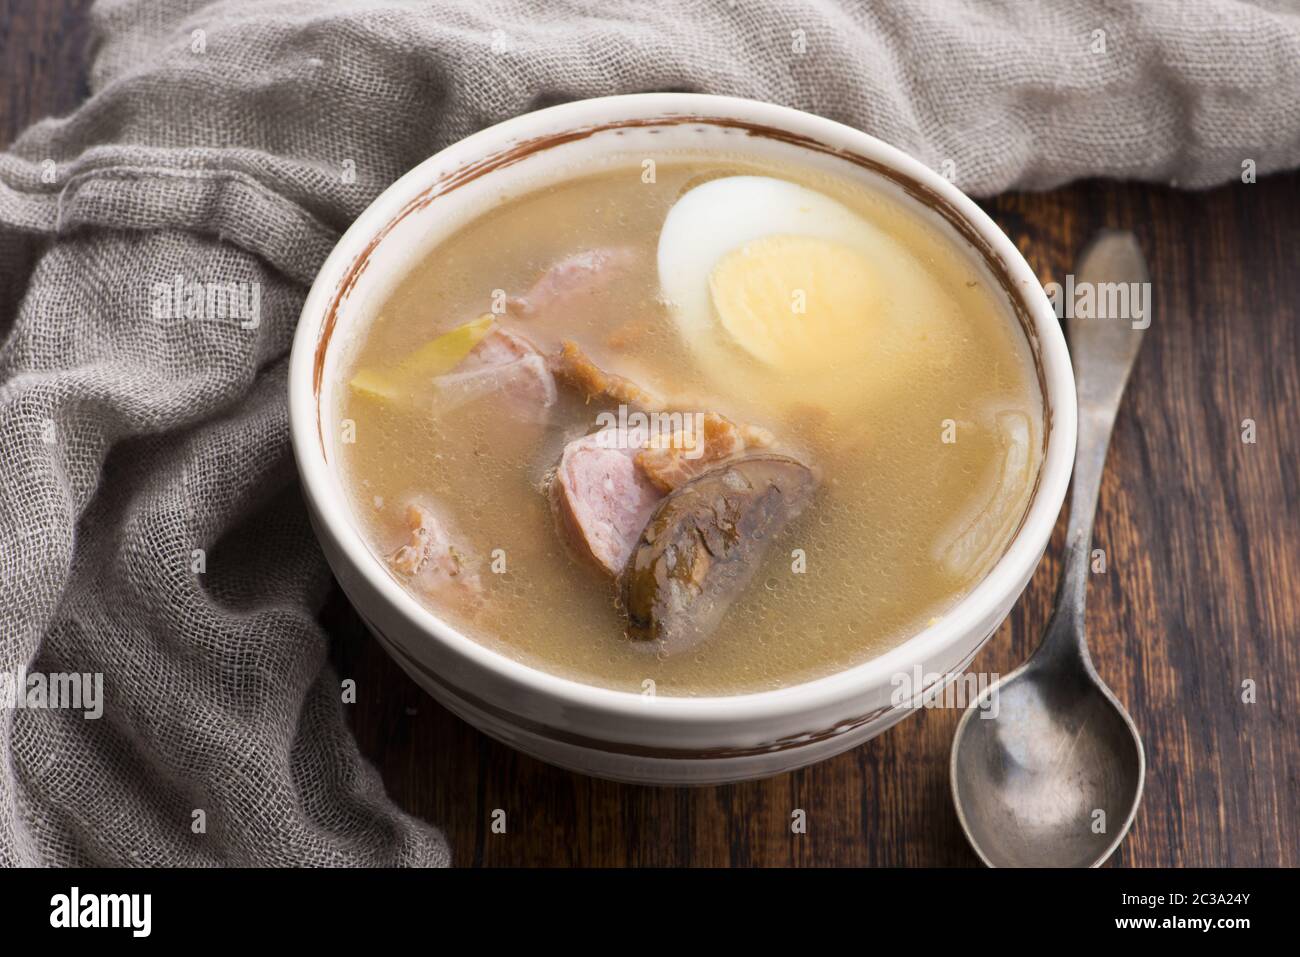 The sour soup made of rye flour Stock Photo